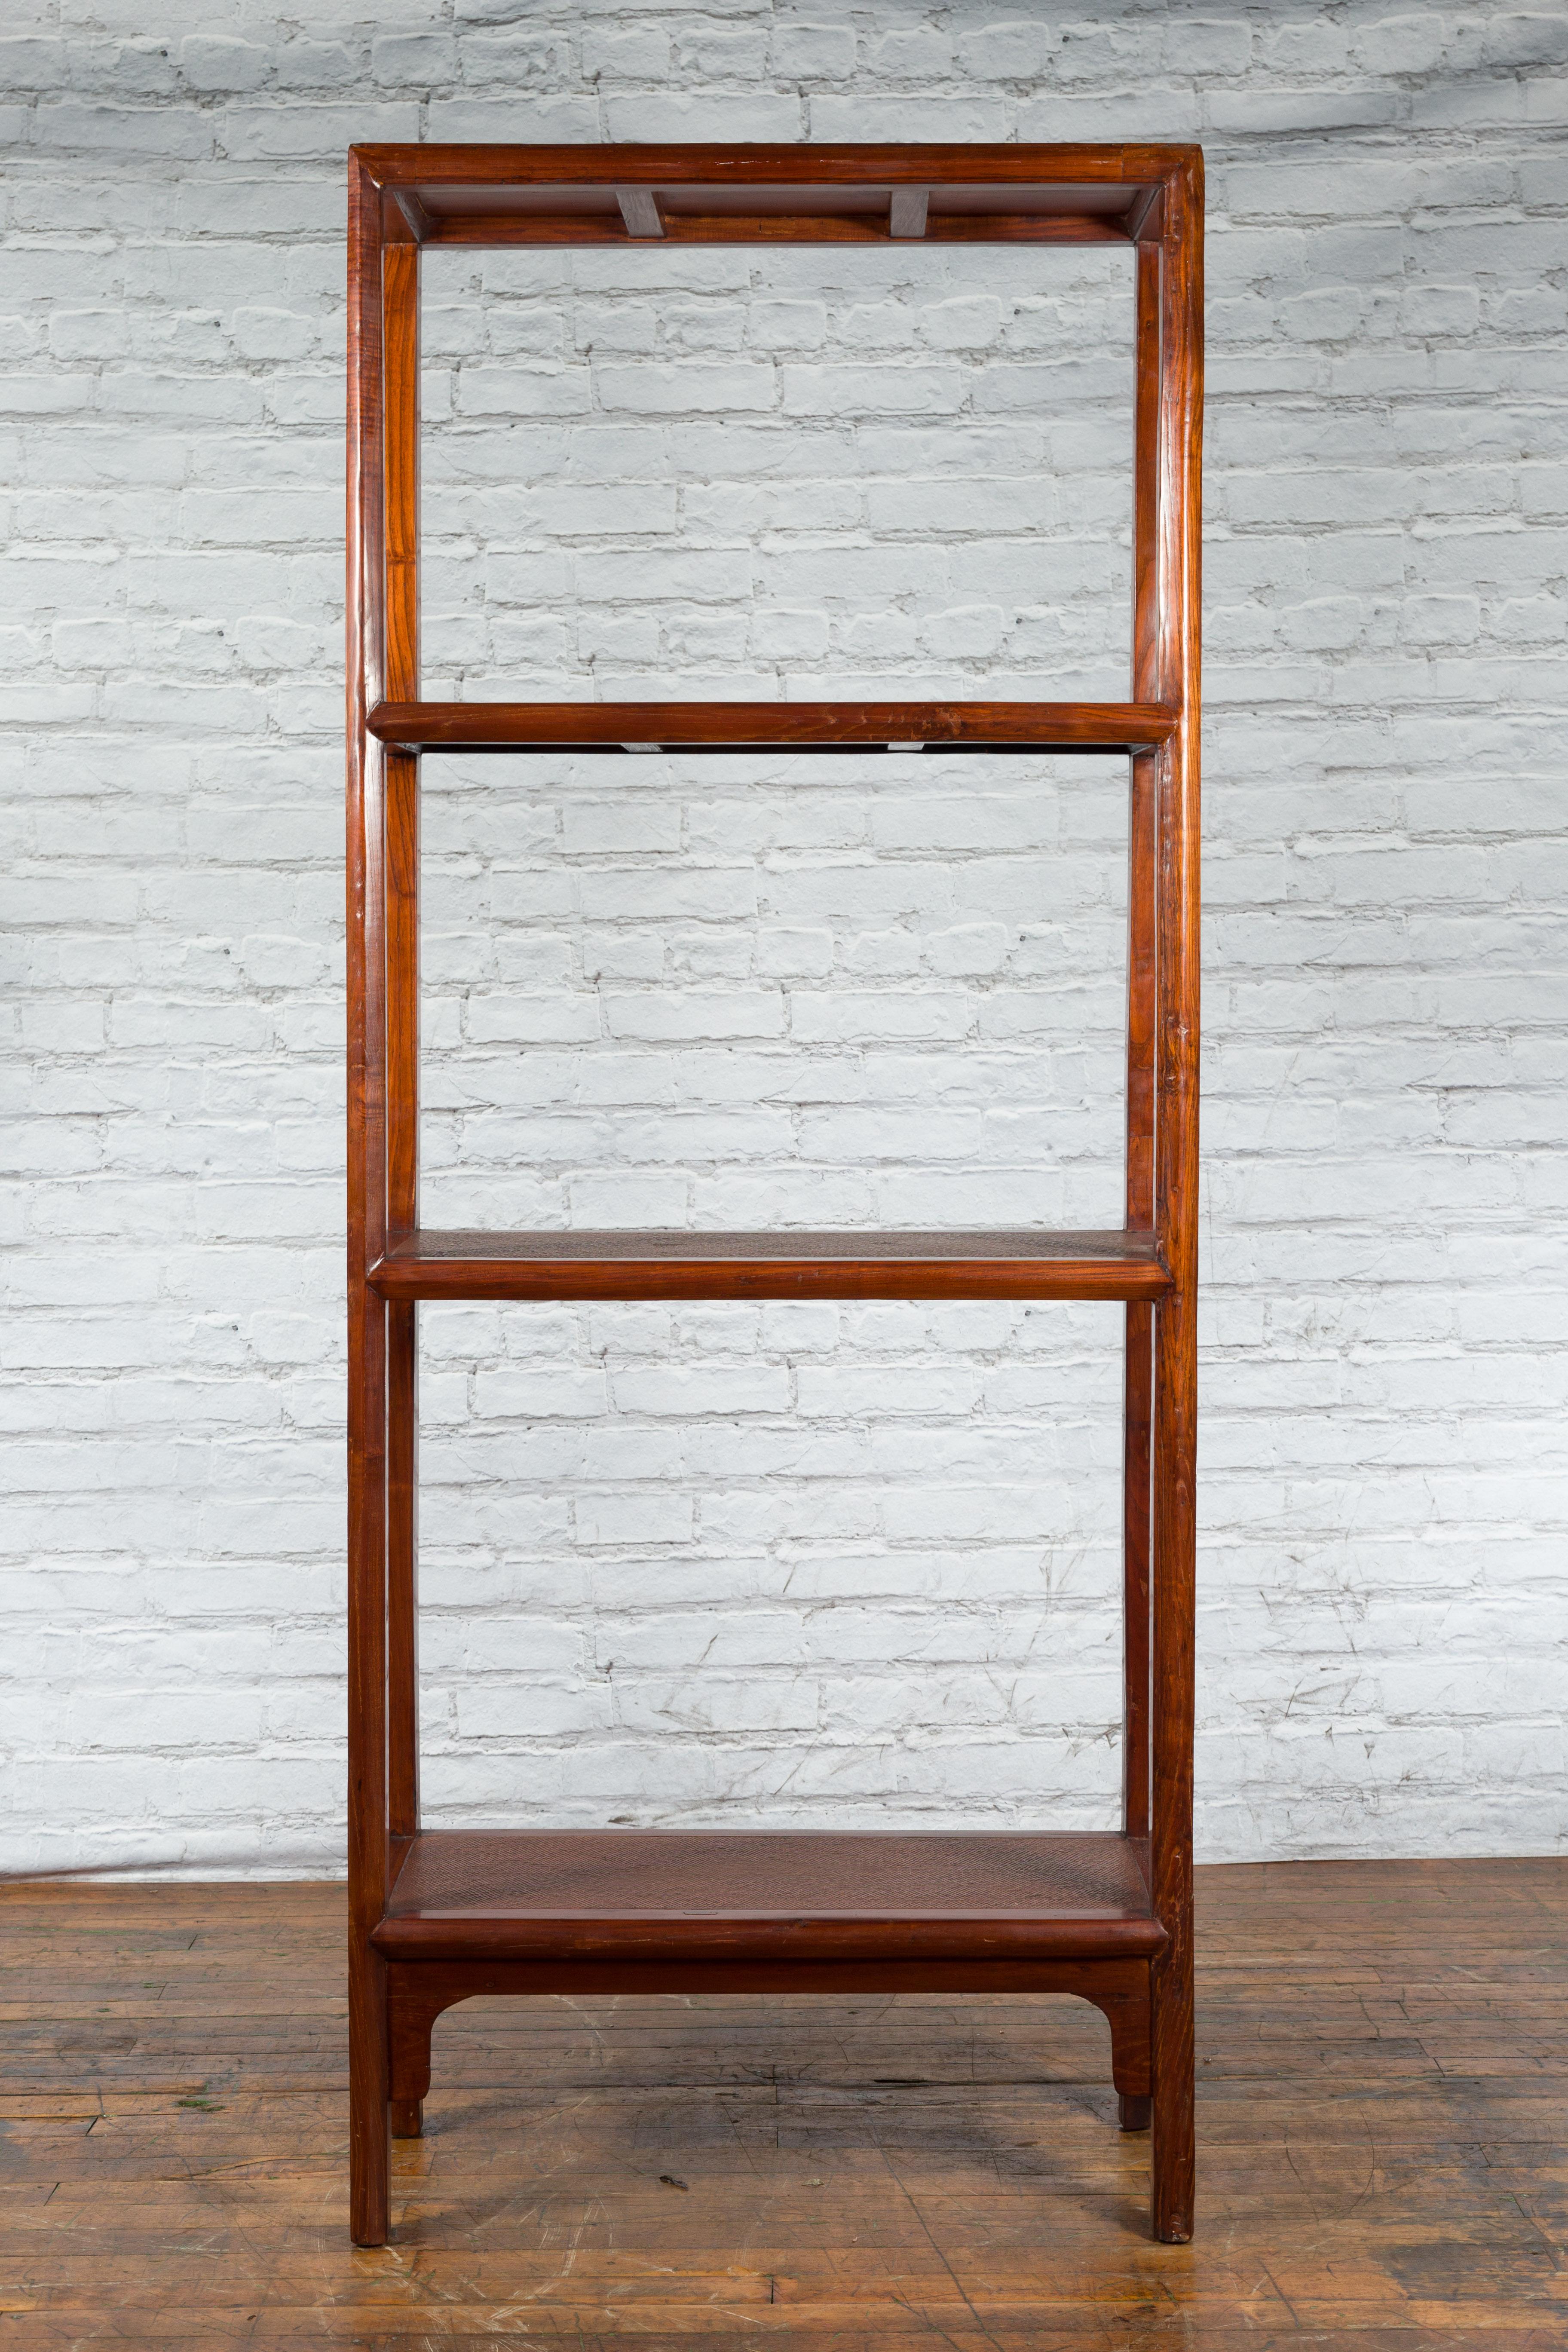 Lacquered Chinese Early 20th Century Wooden Bookcase with Woven Rattan Shelves and Apron For Sale